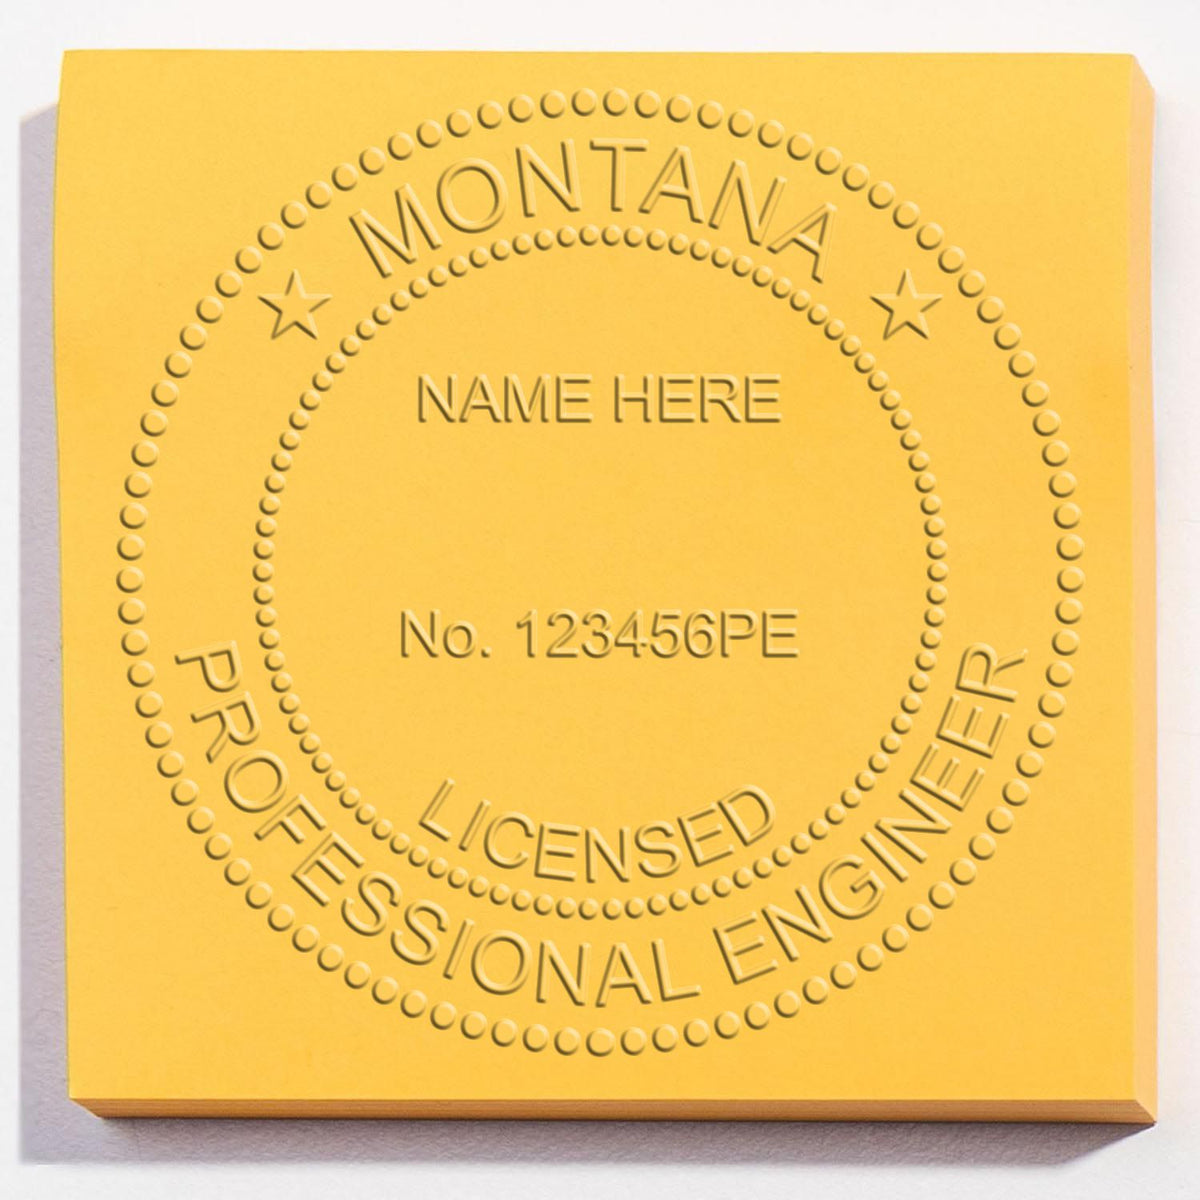 The Heavy Duty Cast Iron Montana Engineer Seal Embosser stamp impression comes to life with a crisp, detailed photo on paper - showcasing true professional quality.